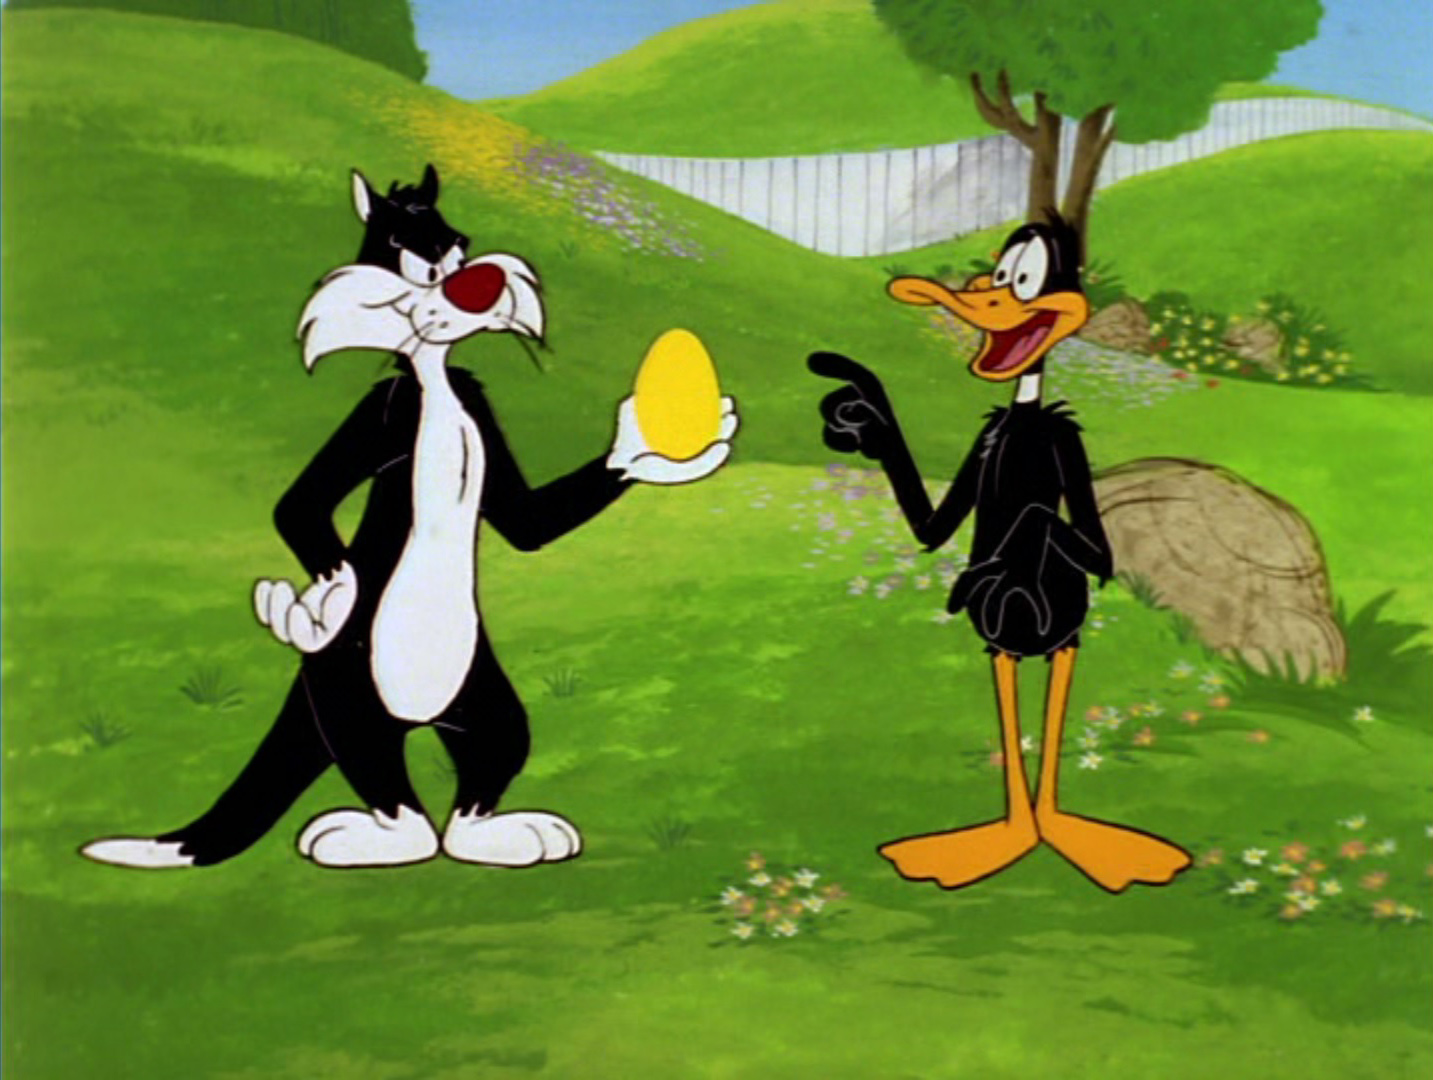 Daffy Duck and Sylvester the Cat are the same voice - Daffy's was sped up.  — Stephen Roessner